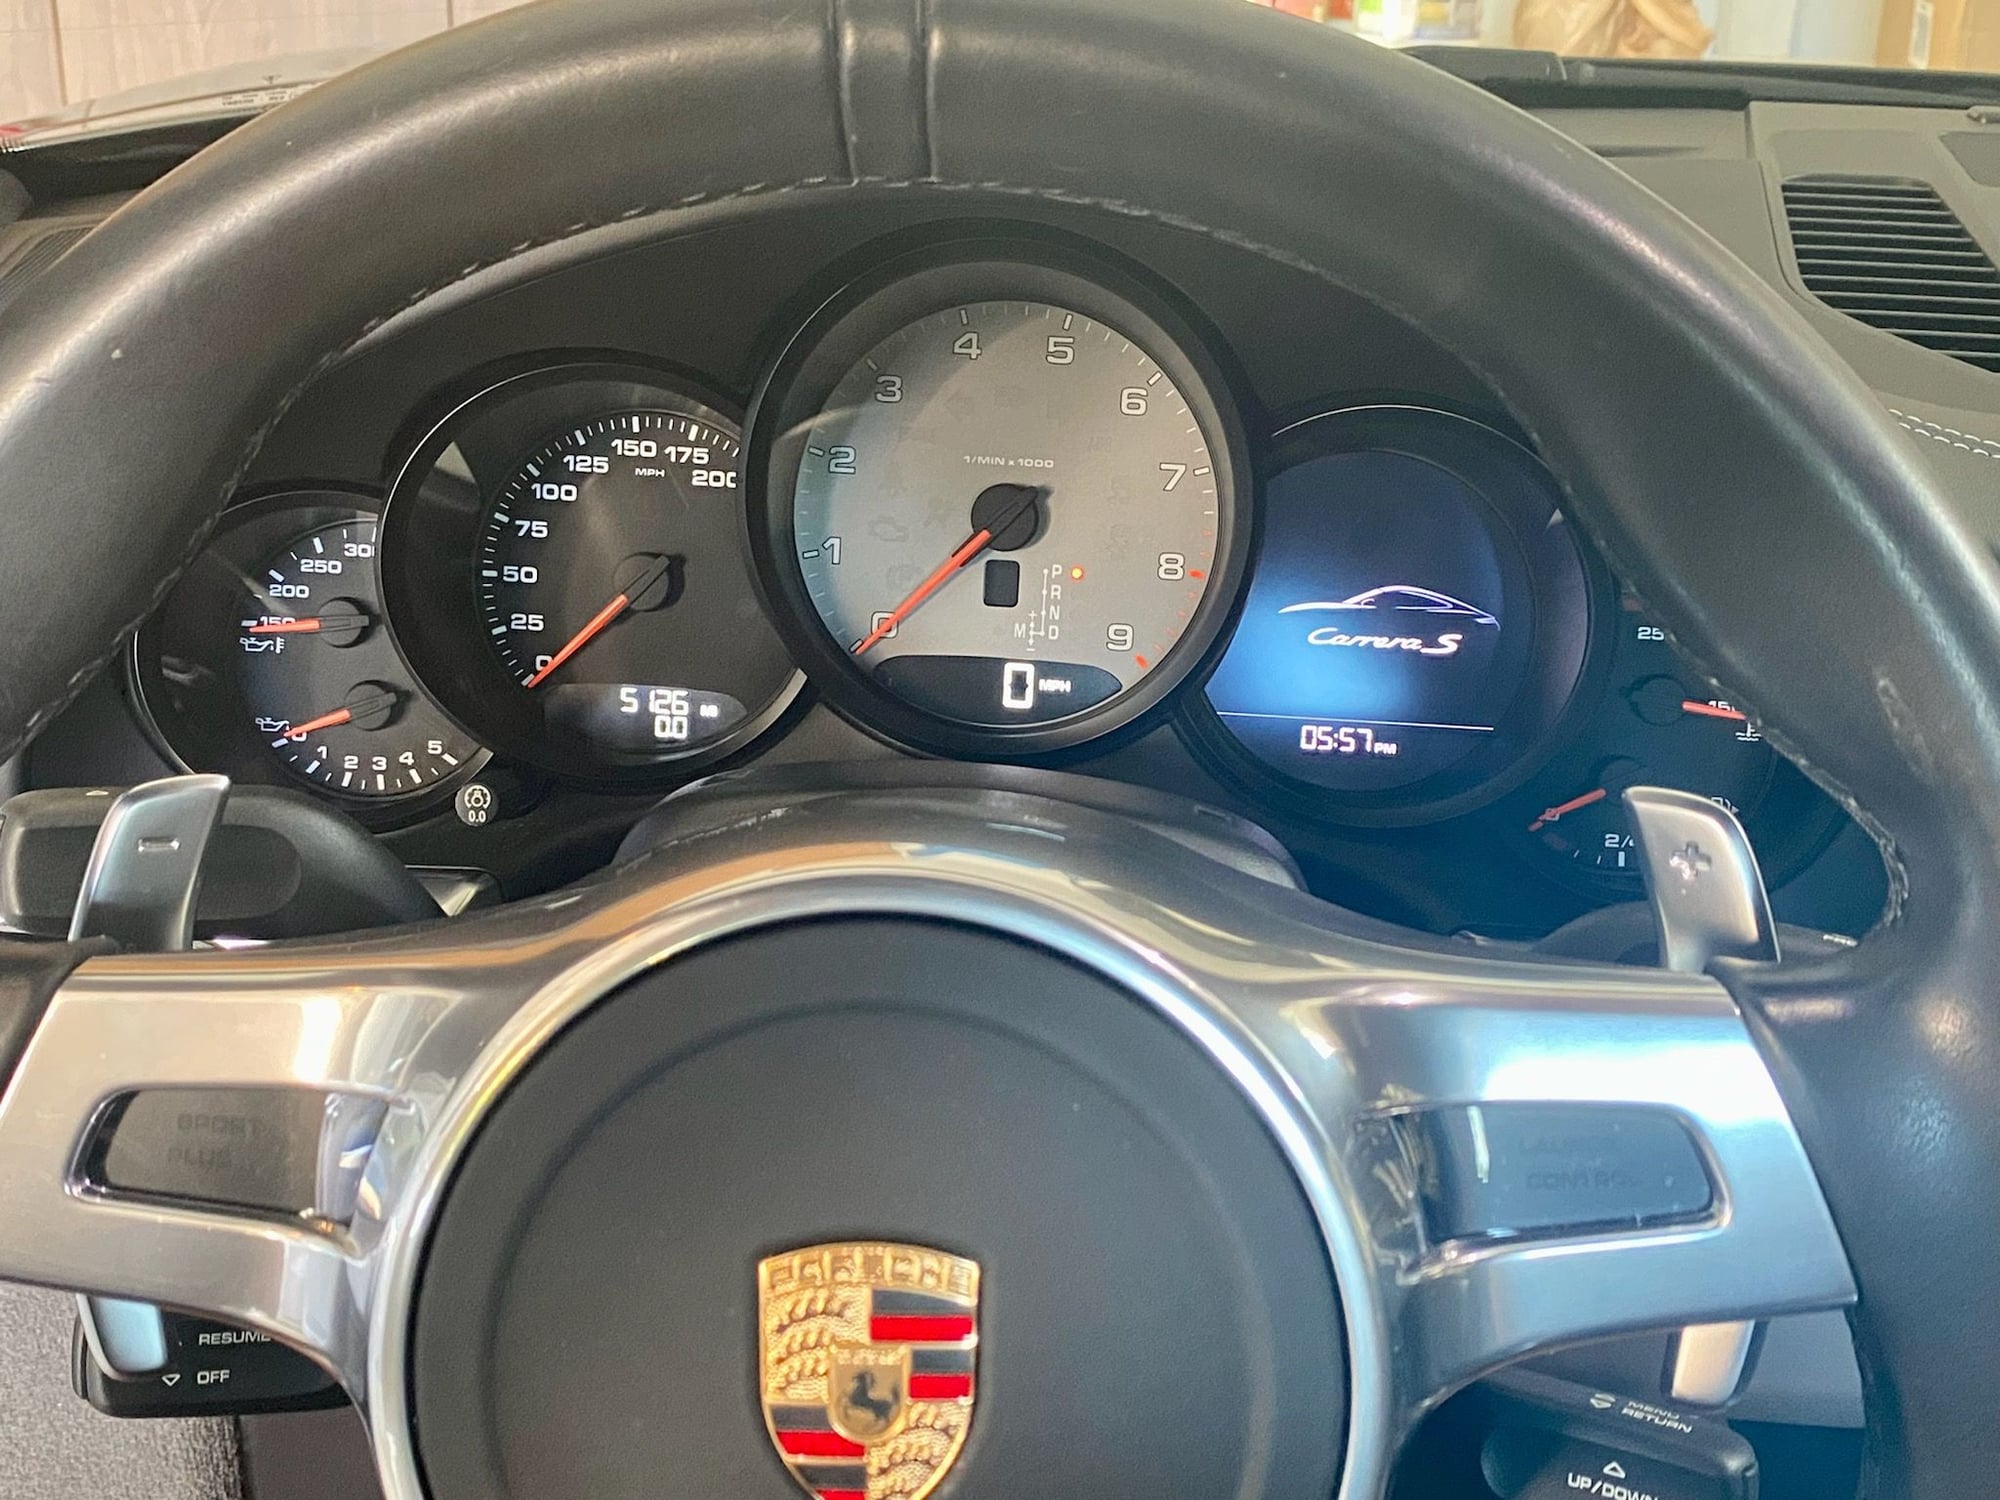 2014 Porsche 911 - 2014 911 Carrera S Coupe 5126 miles Original Owner PDK - Used - VIN WP0AB2A92ES120689 - 5,126 Miles - 6 cyl - 2WD - Automatic - Coupe - Gray - Palm Beach Gardens, FL 33418, United States